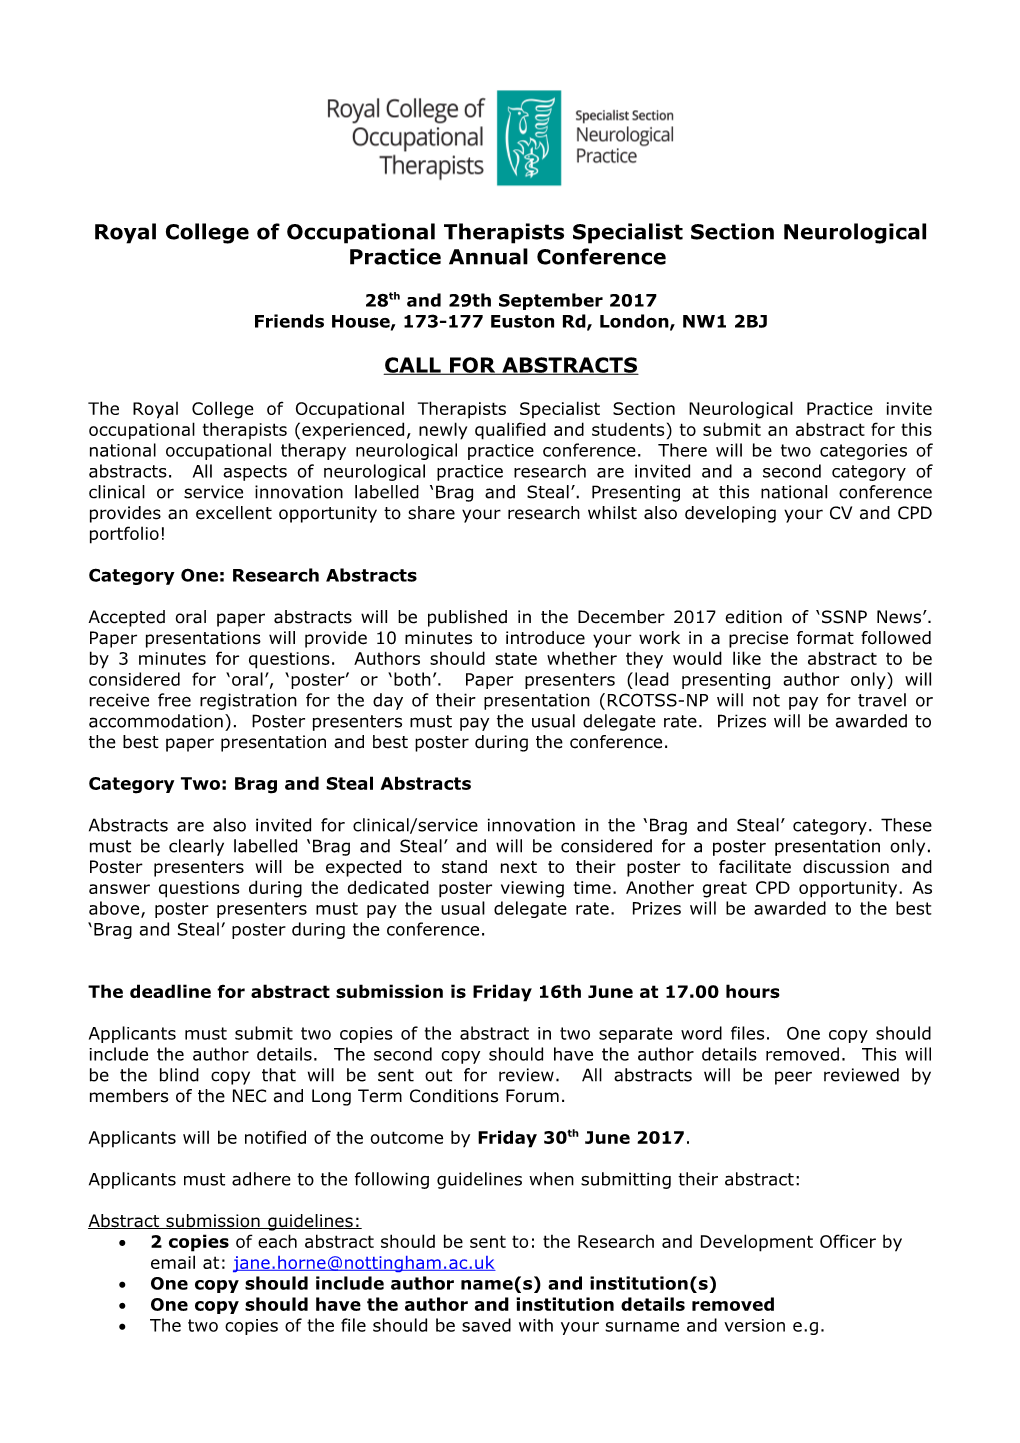 Royal College of Occupational Therapists Specialist Section Neurological Practiceannual